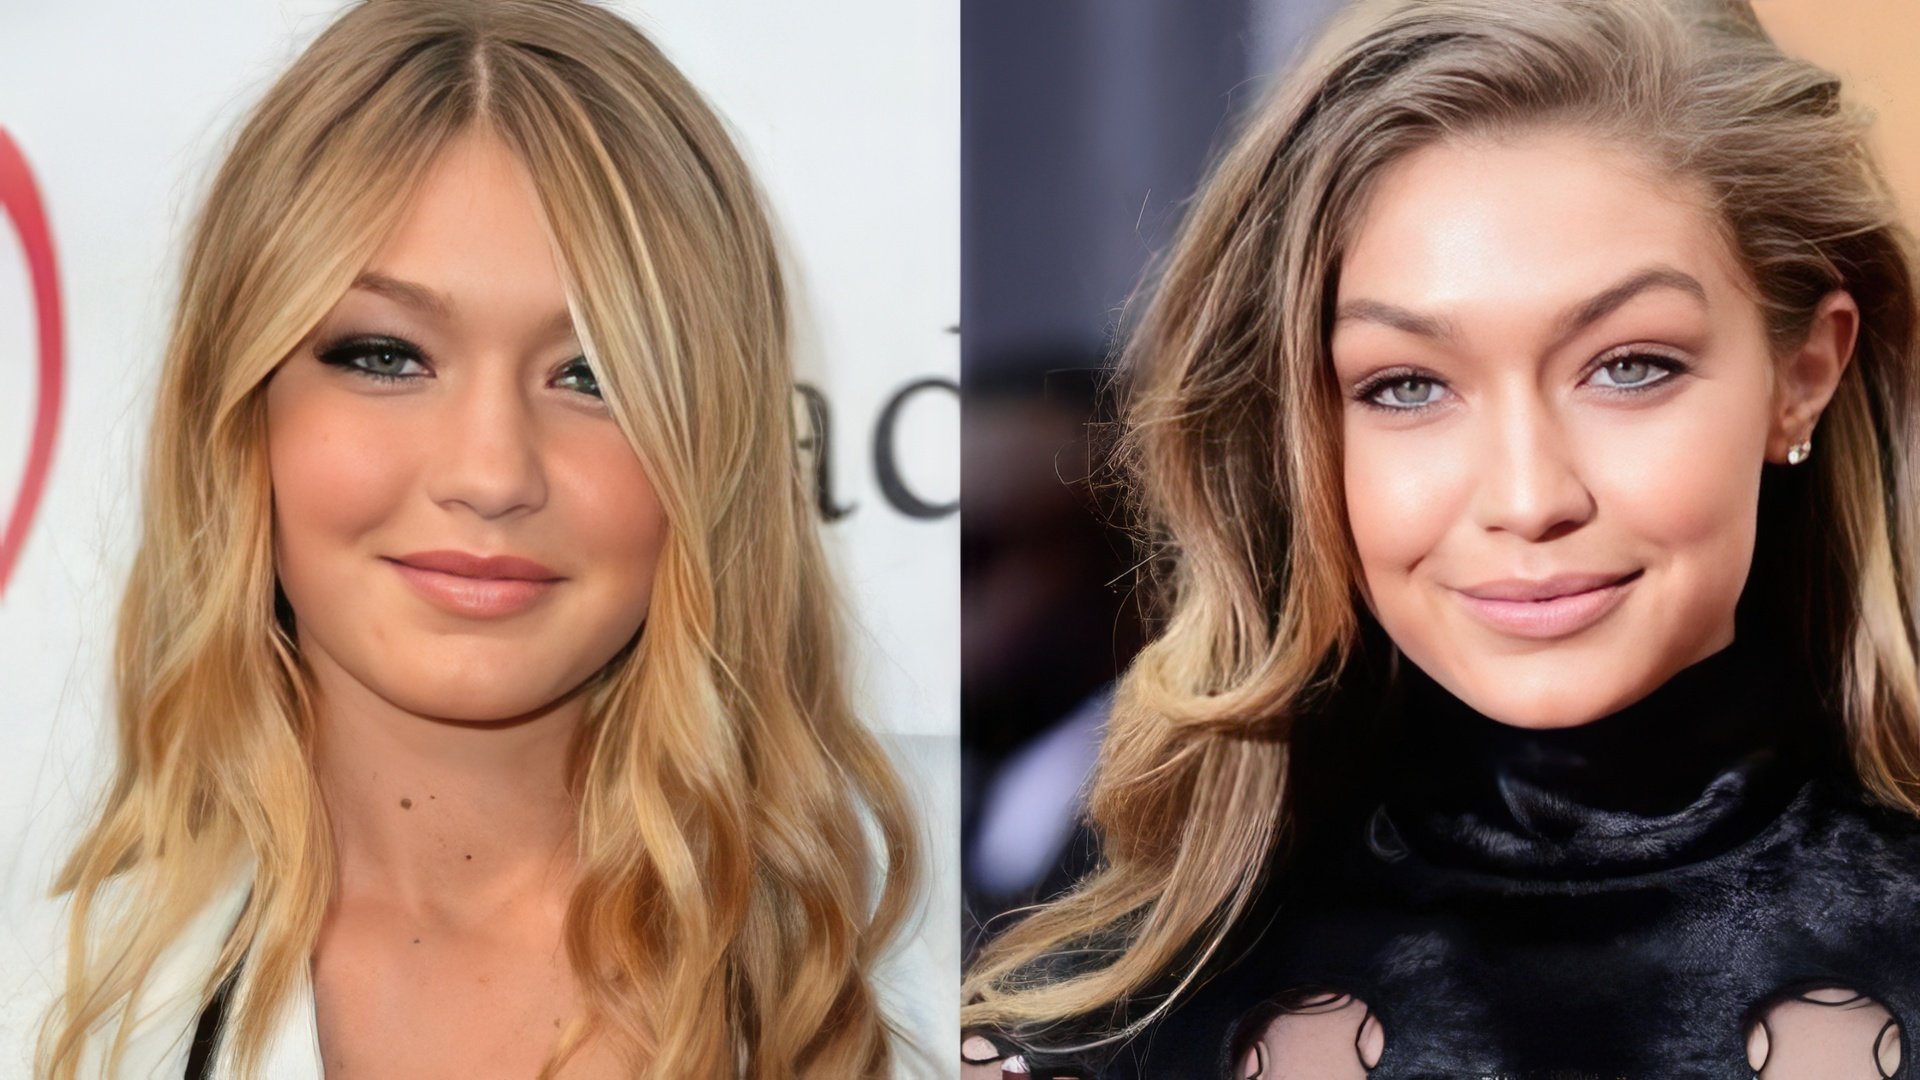 Gigi Hadid before and after plastic surgery (2012 and 2016)